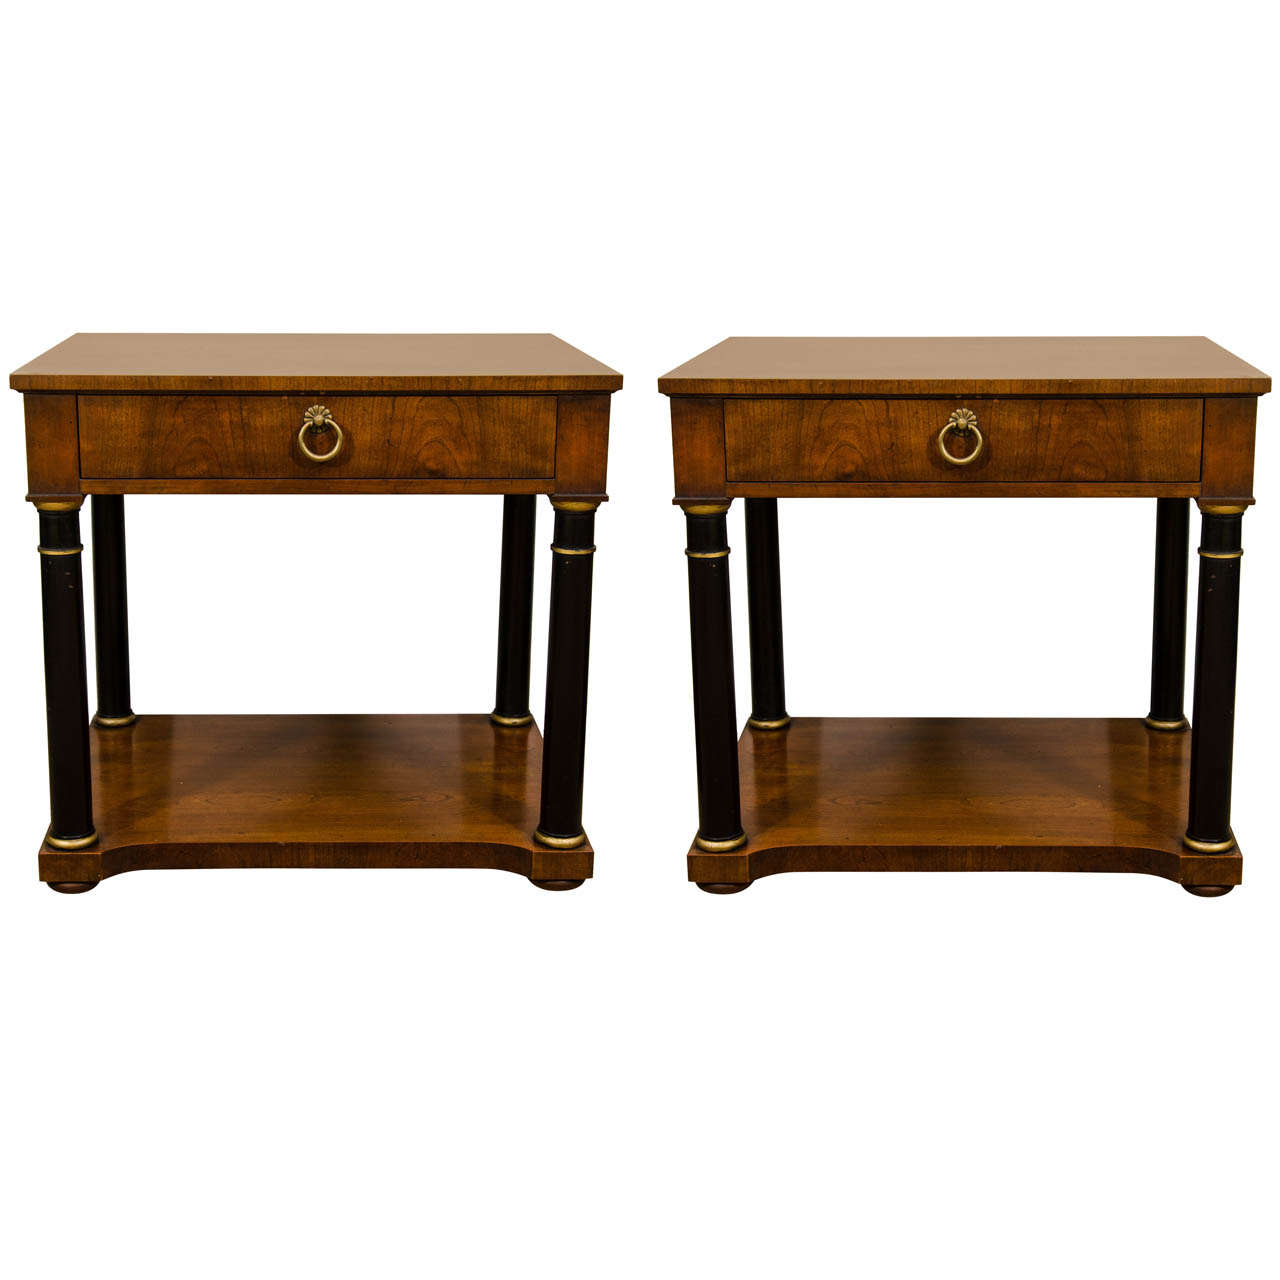 A Pair of Vintage Baker Neoclassical Style Side Tables